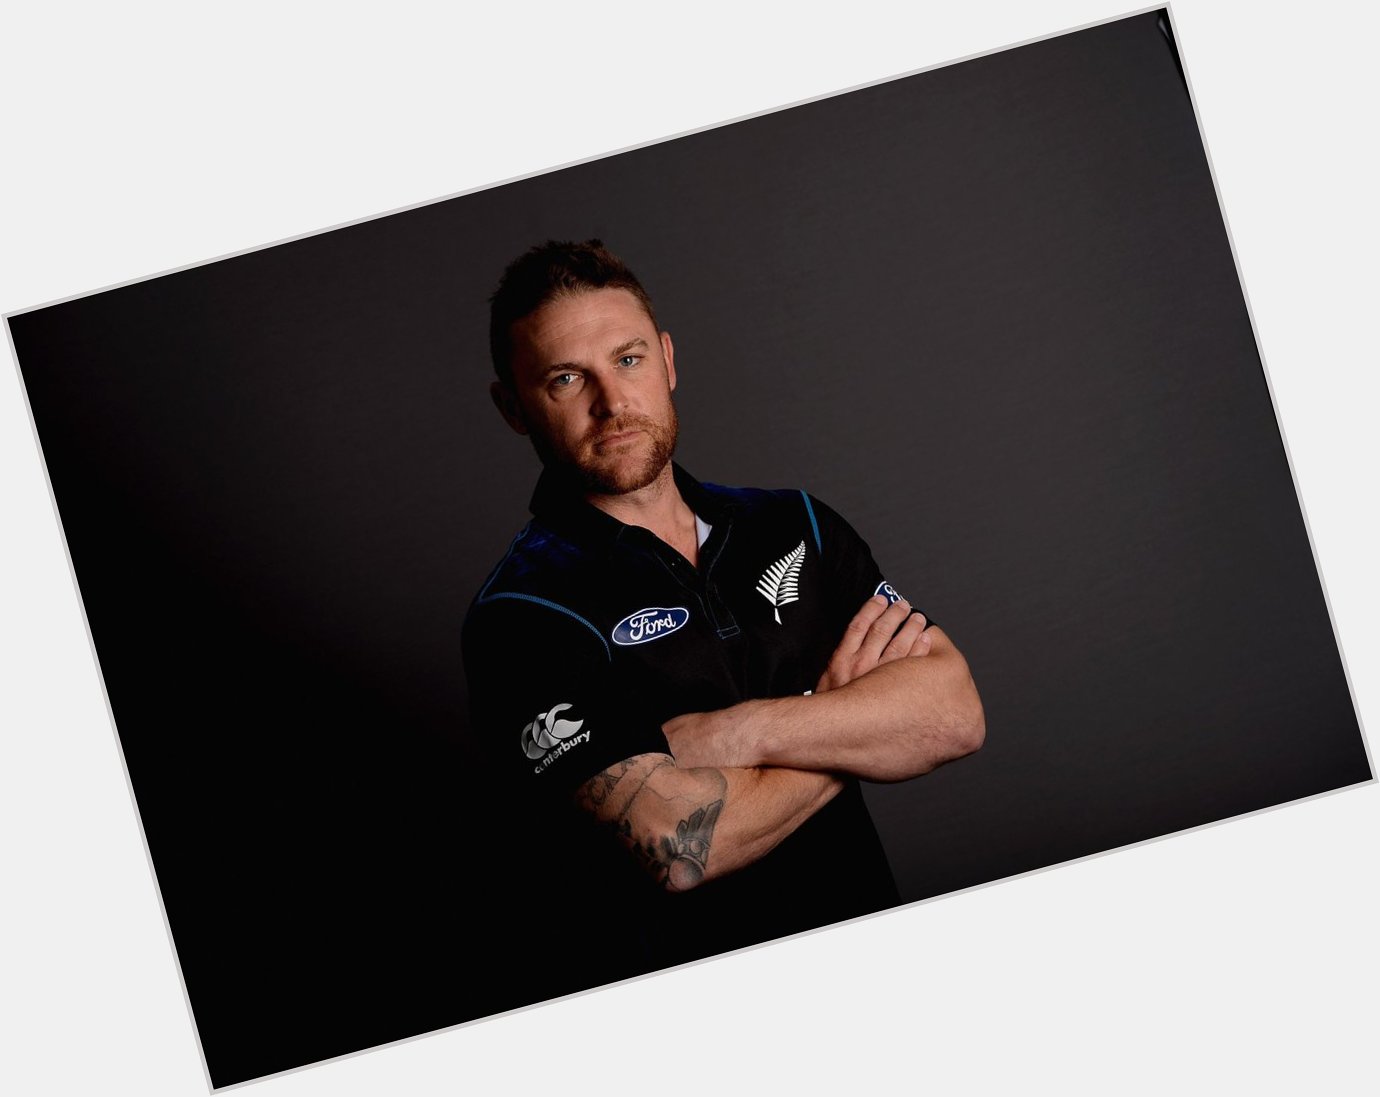 Happy birthday champion my favourite player BRENDON MCCULLUM. Love from INDIA 